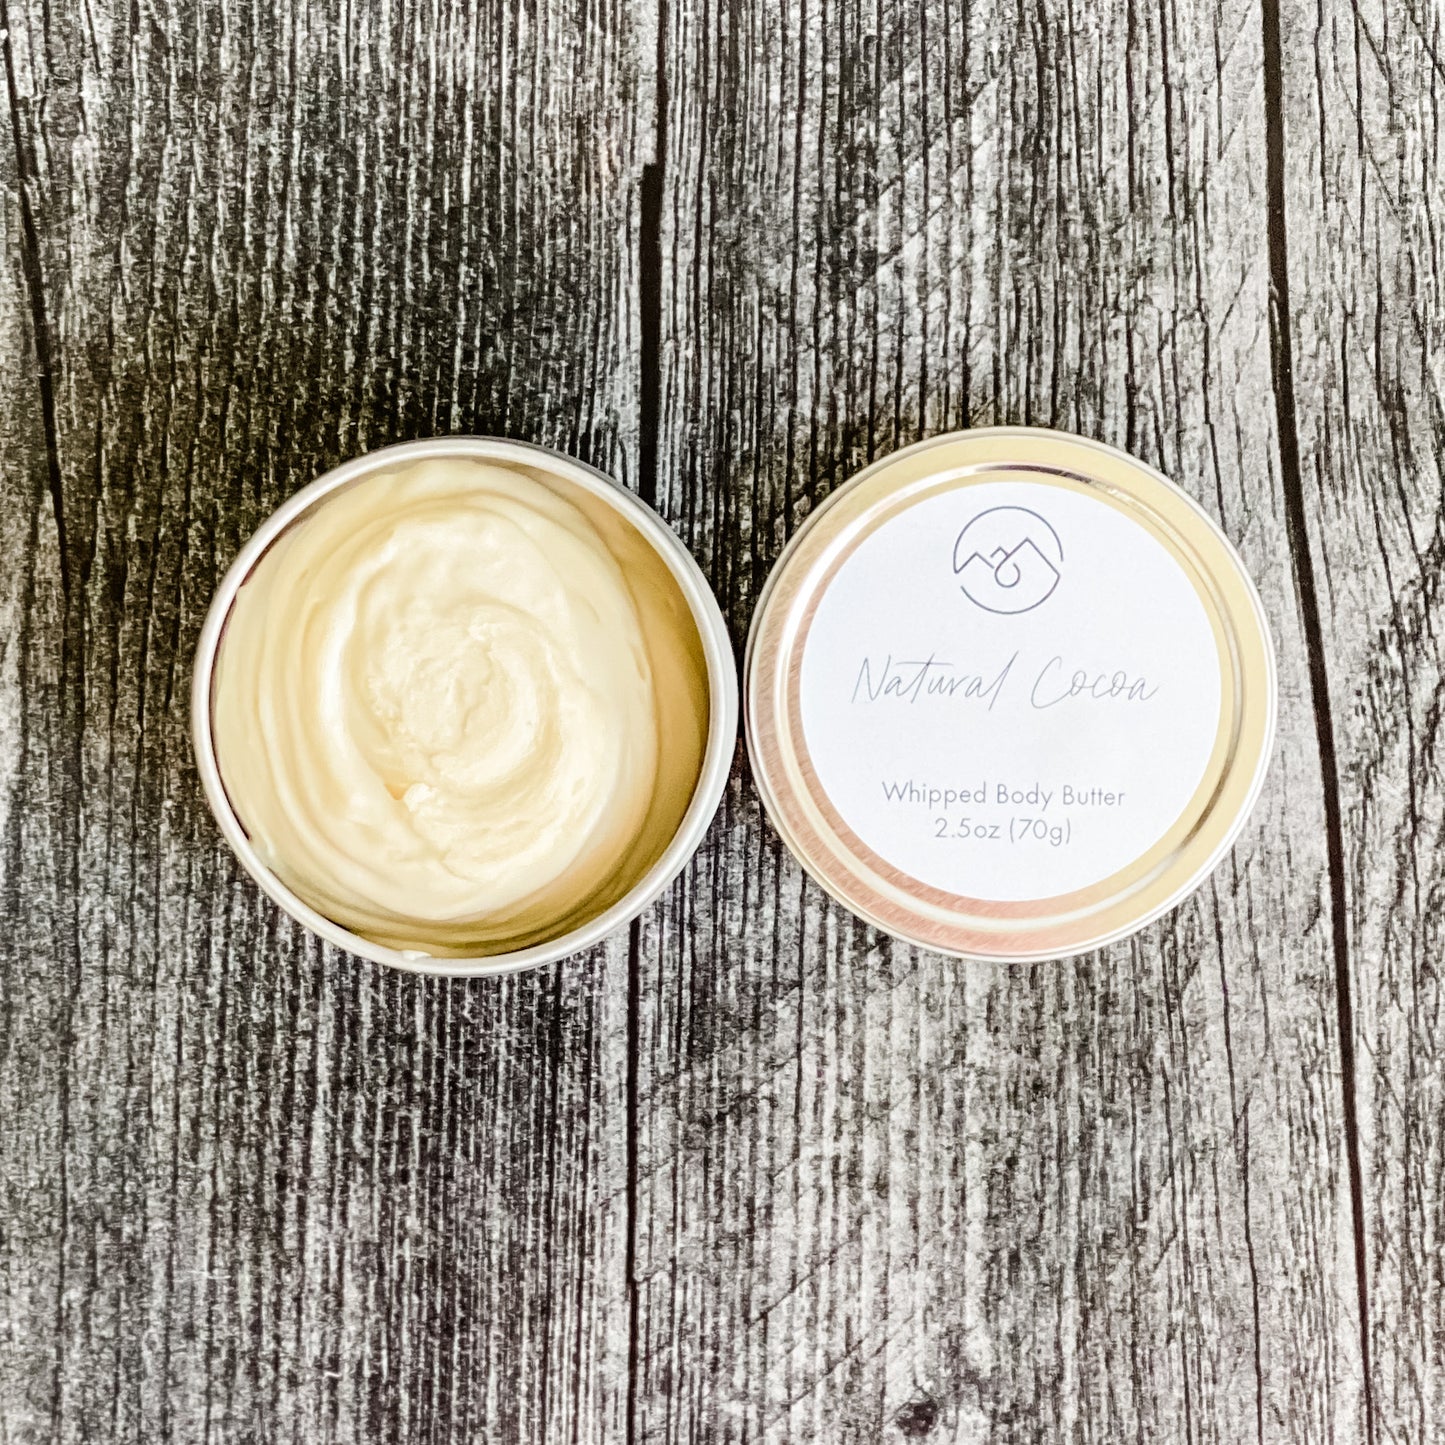 Natural Cocoa Whipped Body Butter in tin with lid next to it. Shows the creamy whipped nature of this body butter.